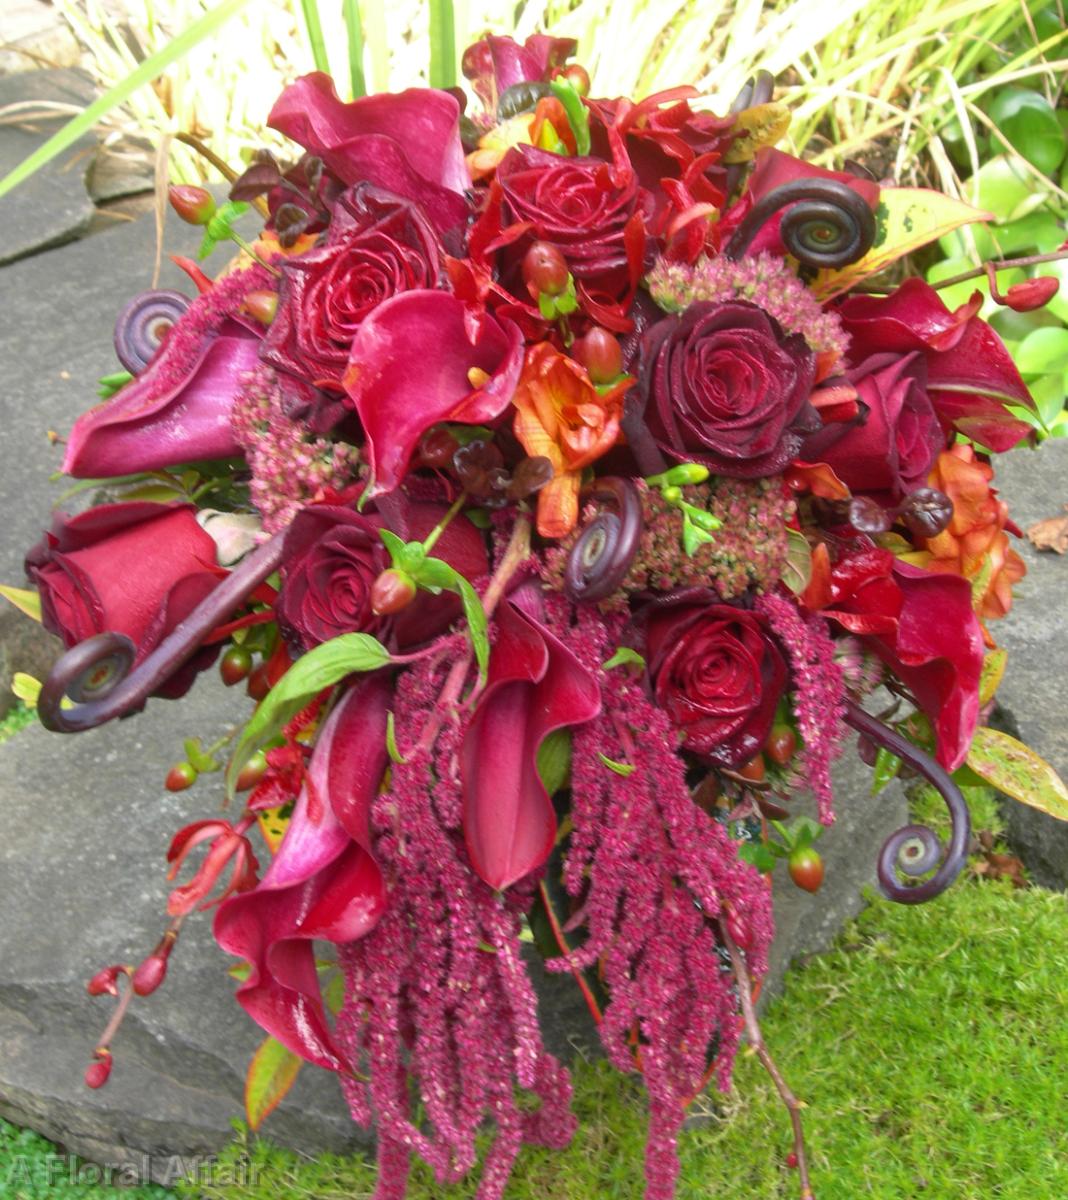 BB0169-Red Rose and Amaranthus Cascade